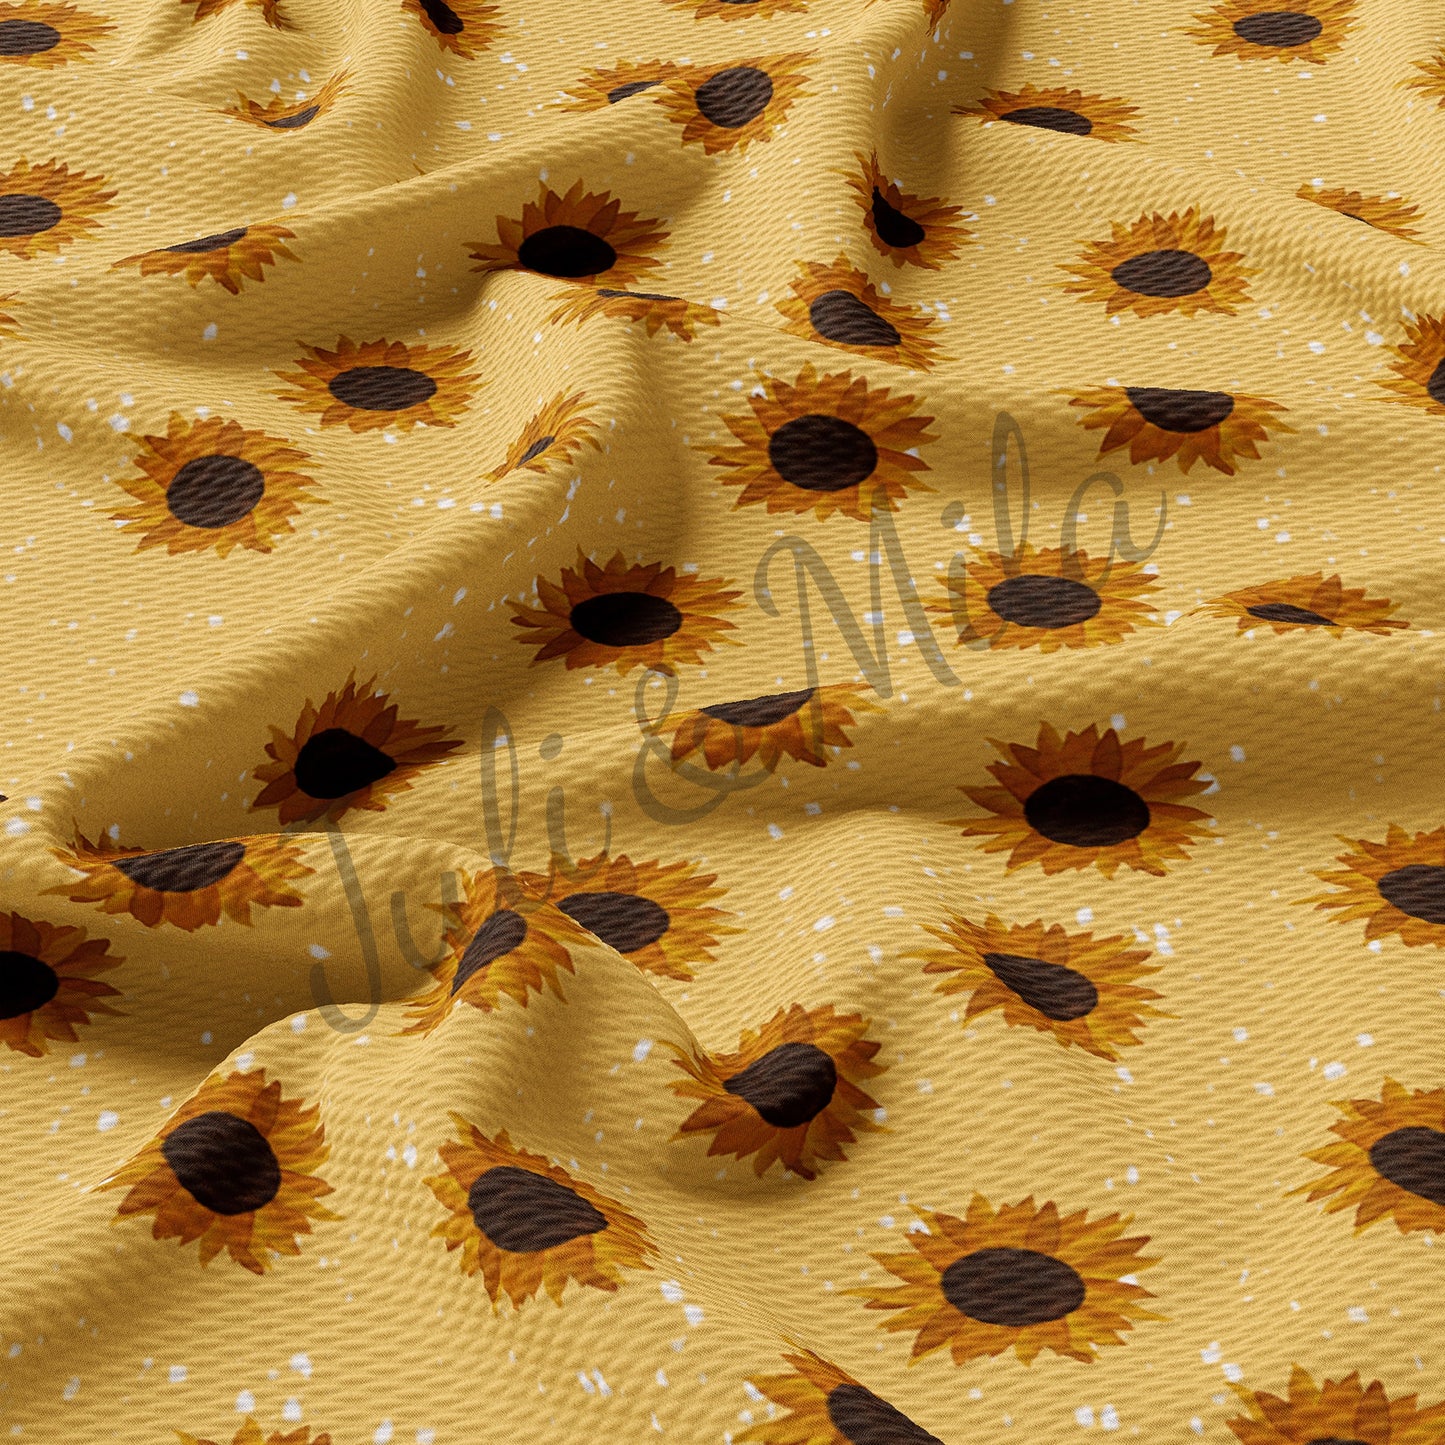 Printed Liverpool Bullet Textured Fabric  (sunflower)